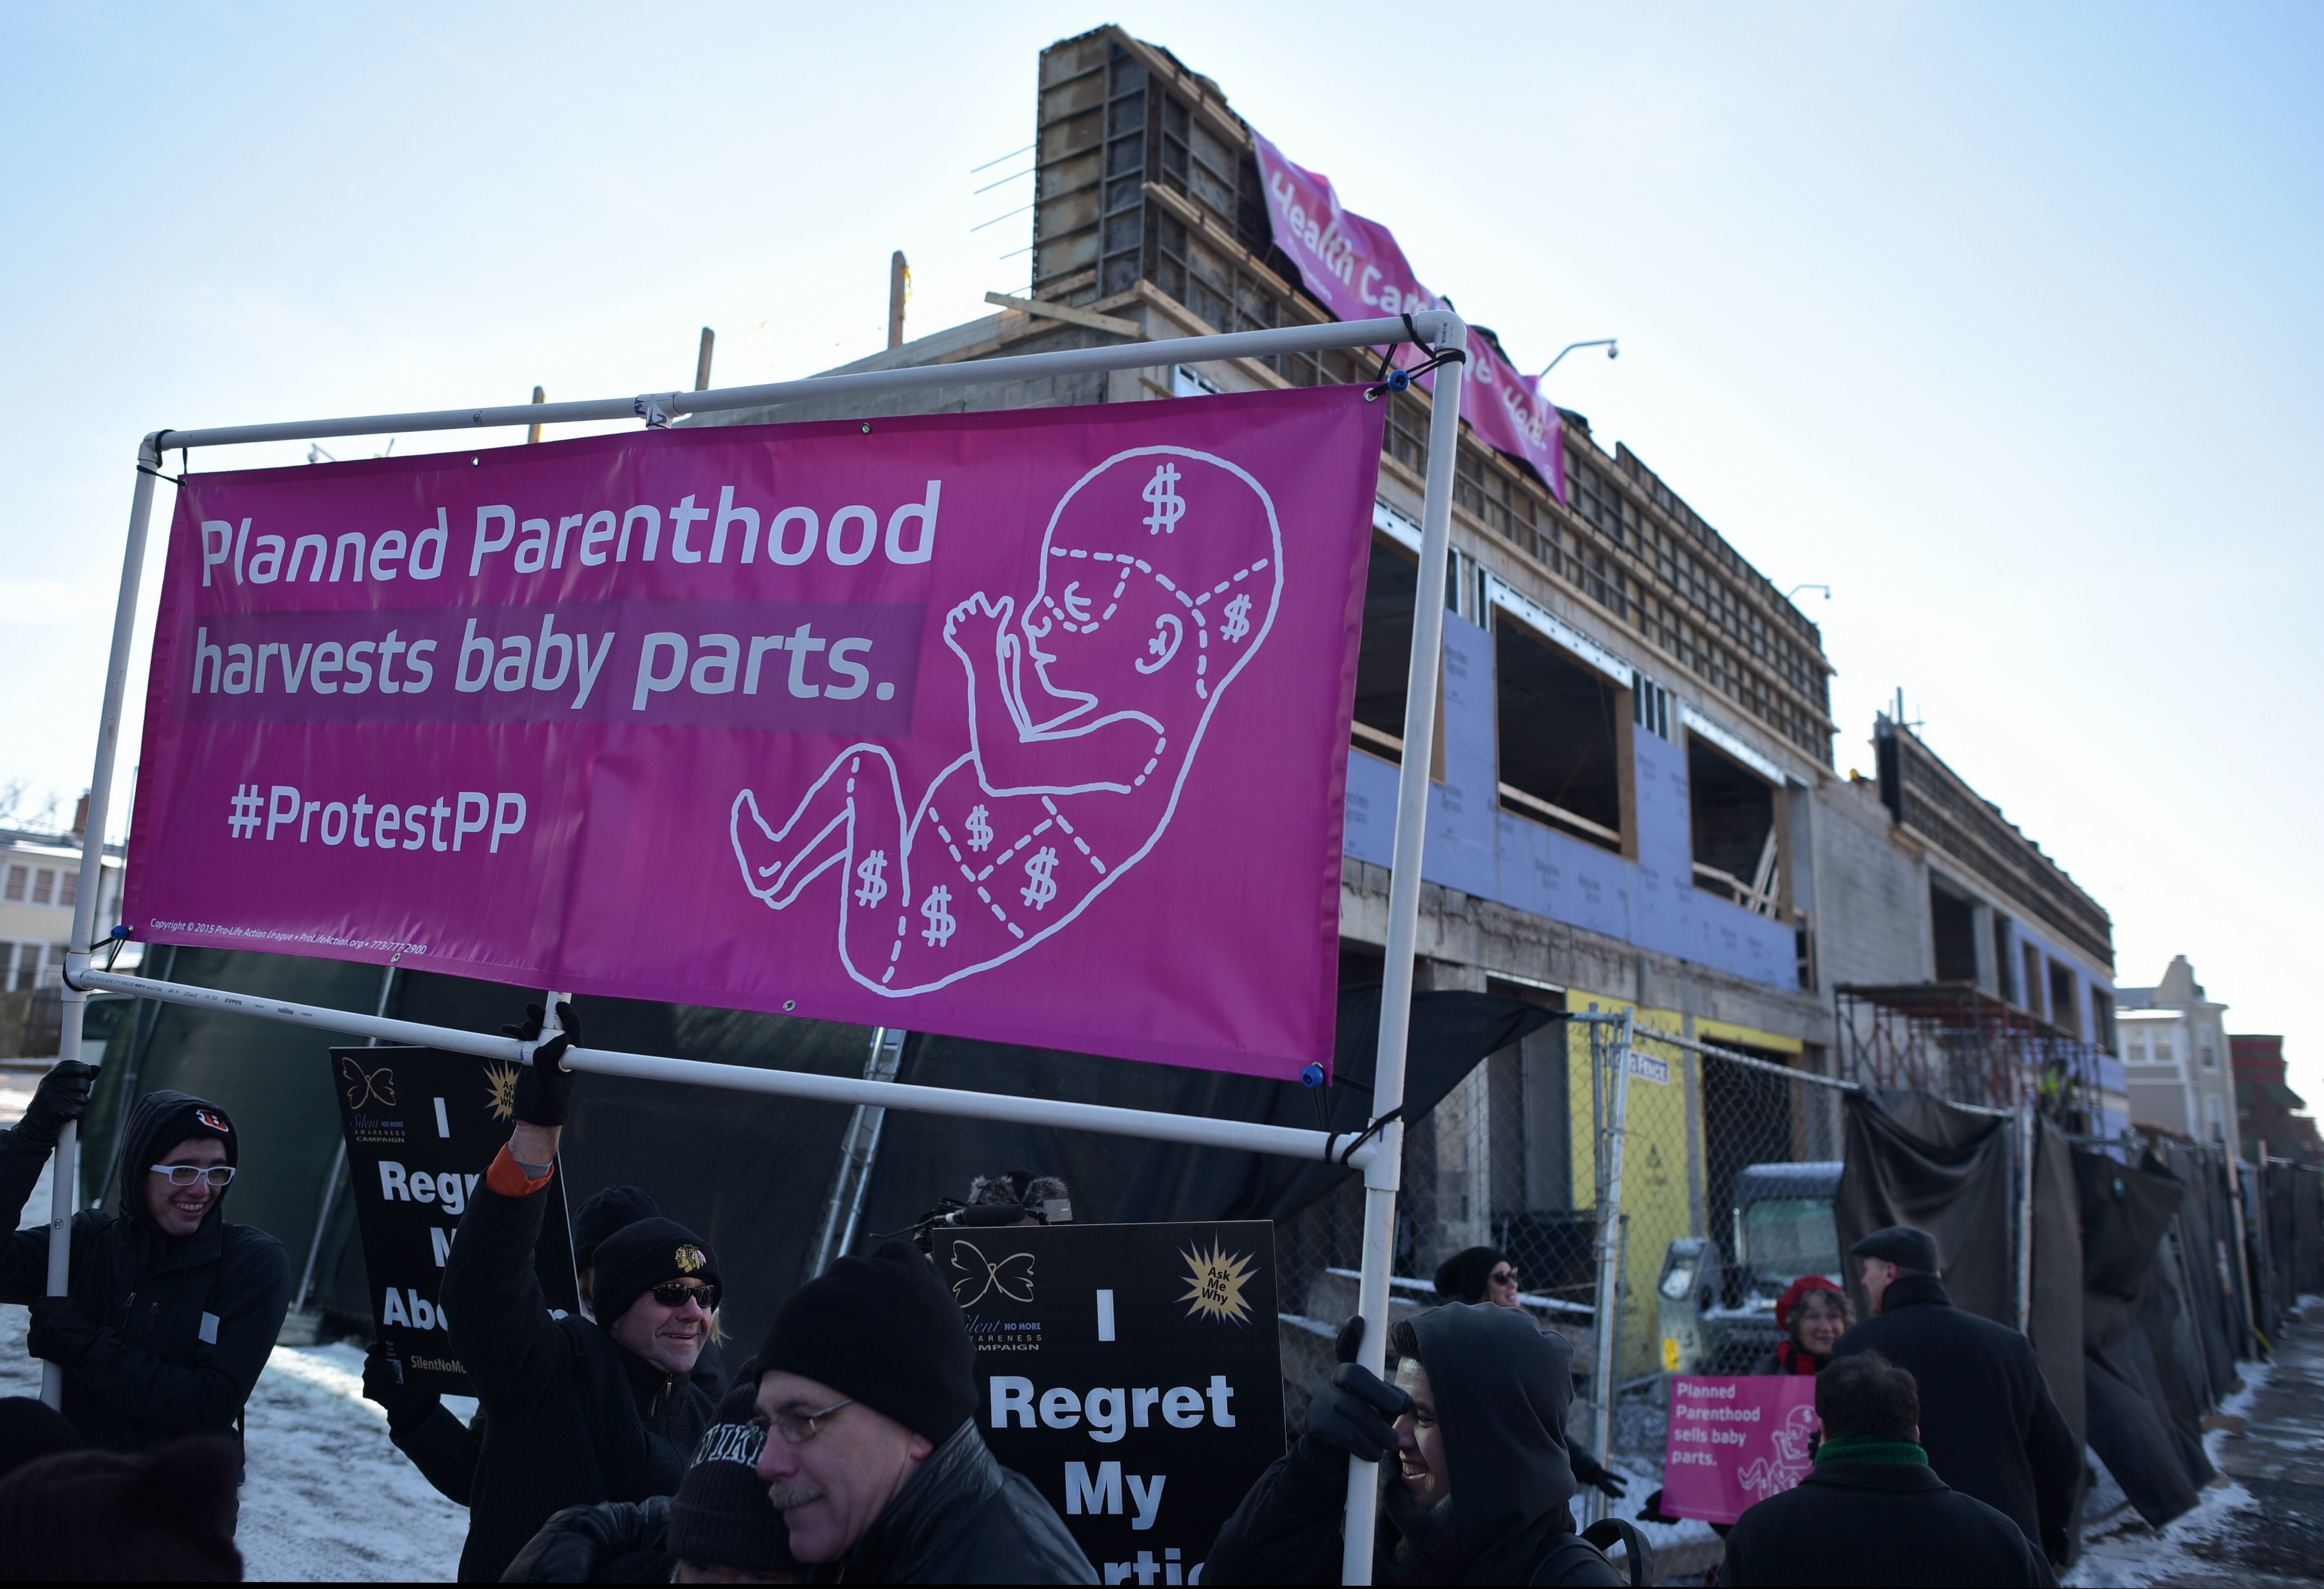 Anti-abortion activists take part in a protest outside of a Planned Parenthood center construction site on January 21, 2016 in Washington, DC. (Getty)